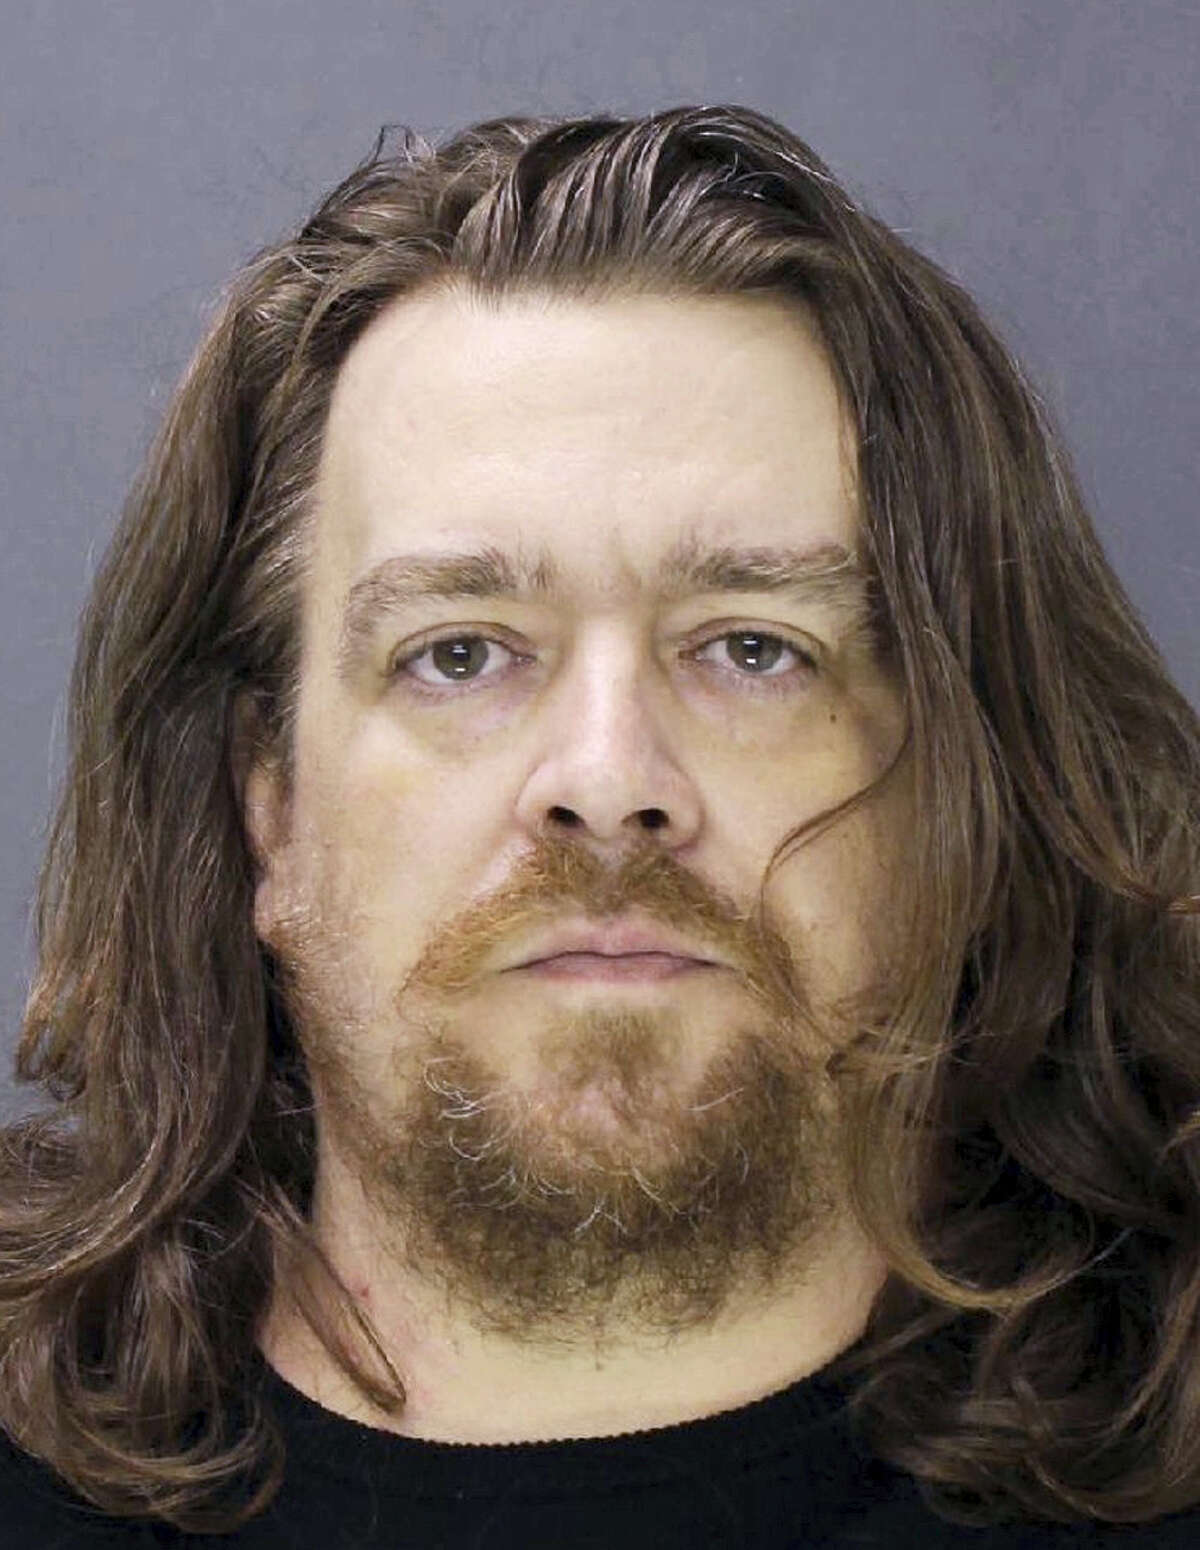 In this photo provided on Sunday, Jan. 8, 2017, by the Bucks County District Attorney shows Jacob Sullivan. Sara Packer, whose teenage daughter’s dismembered remains were found in the woods last fall, has been charged along with her boyfriend Sullivan with killing the girl in a “rape-murder fantasy” the couple shared, a prosecutor said.